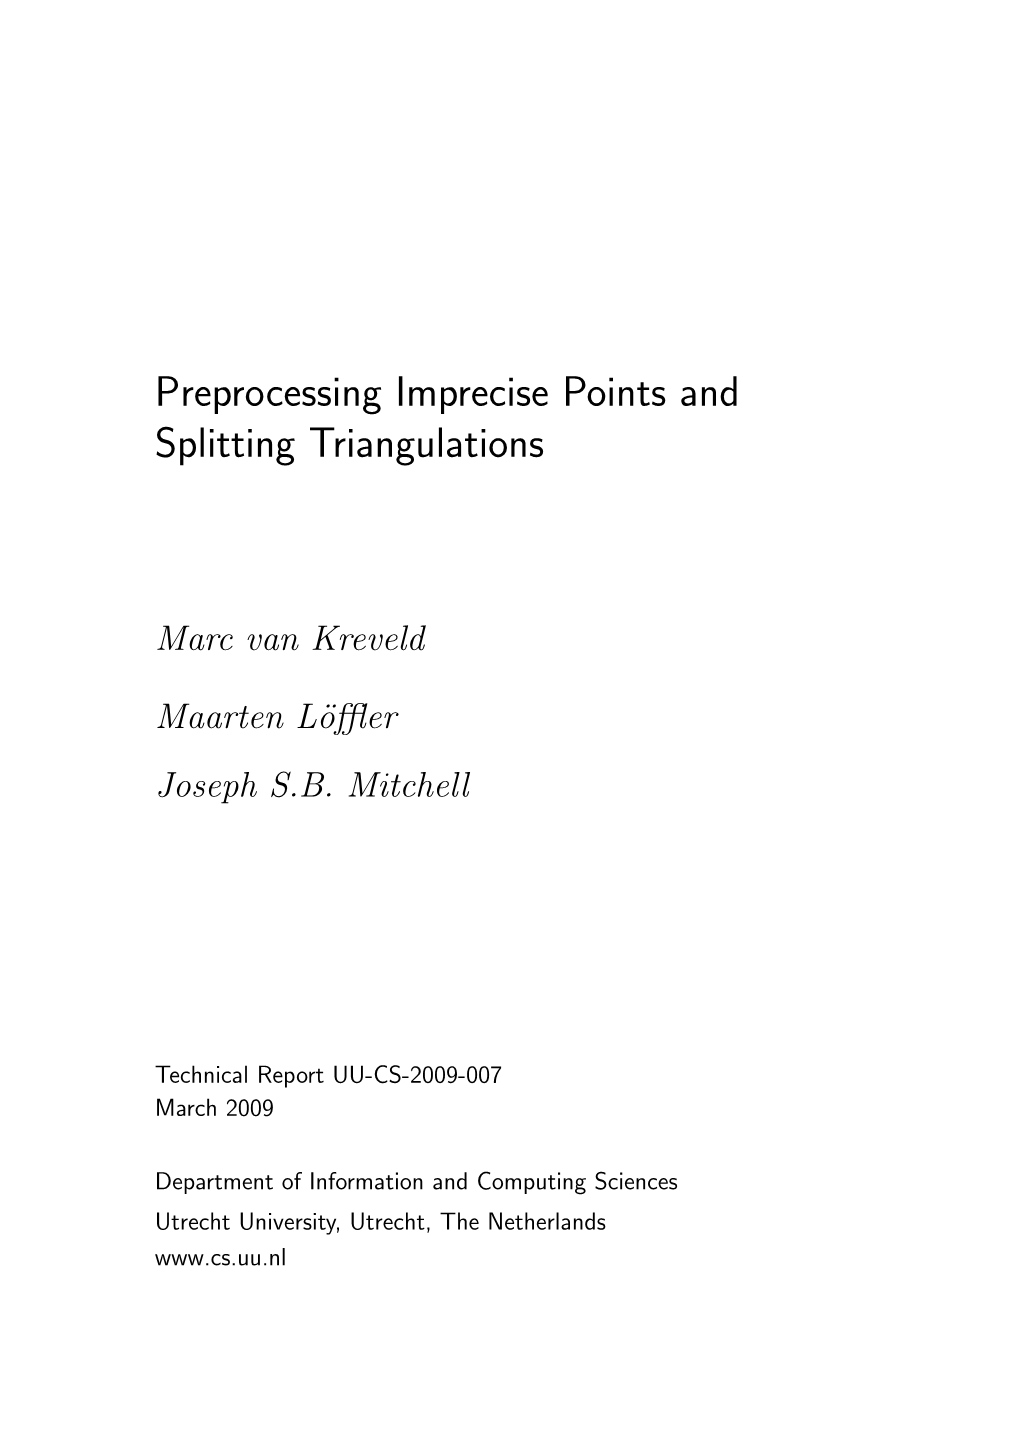 Preprocessing Imprecise Points and Splitting Triangulations